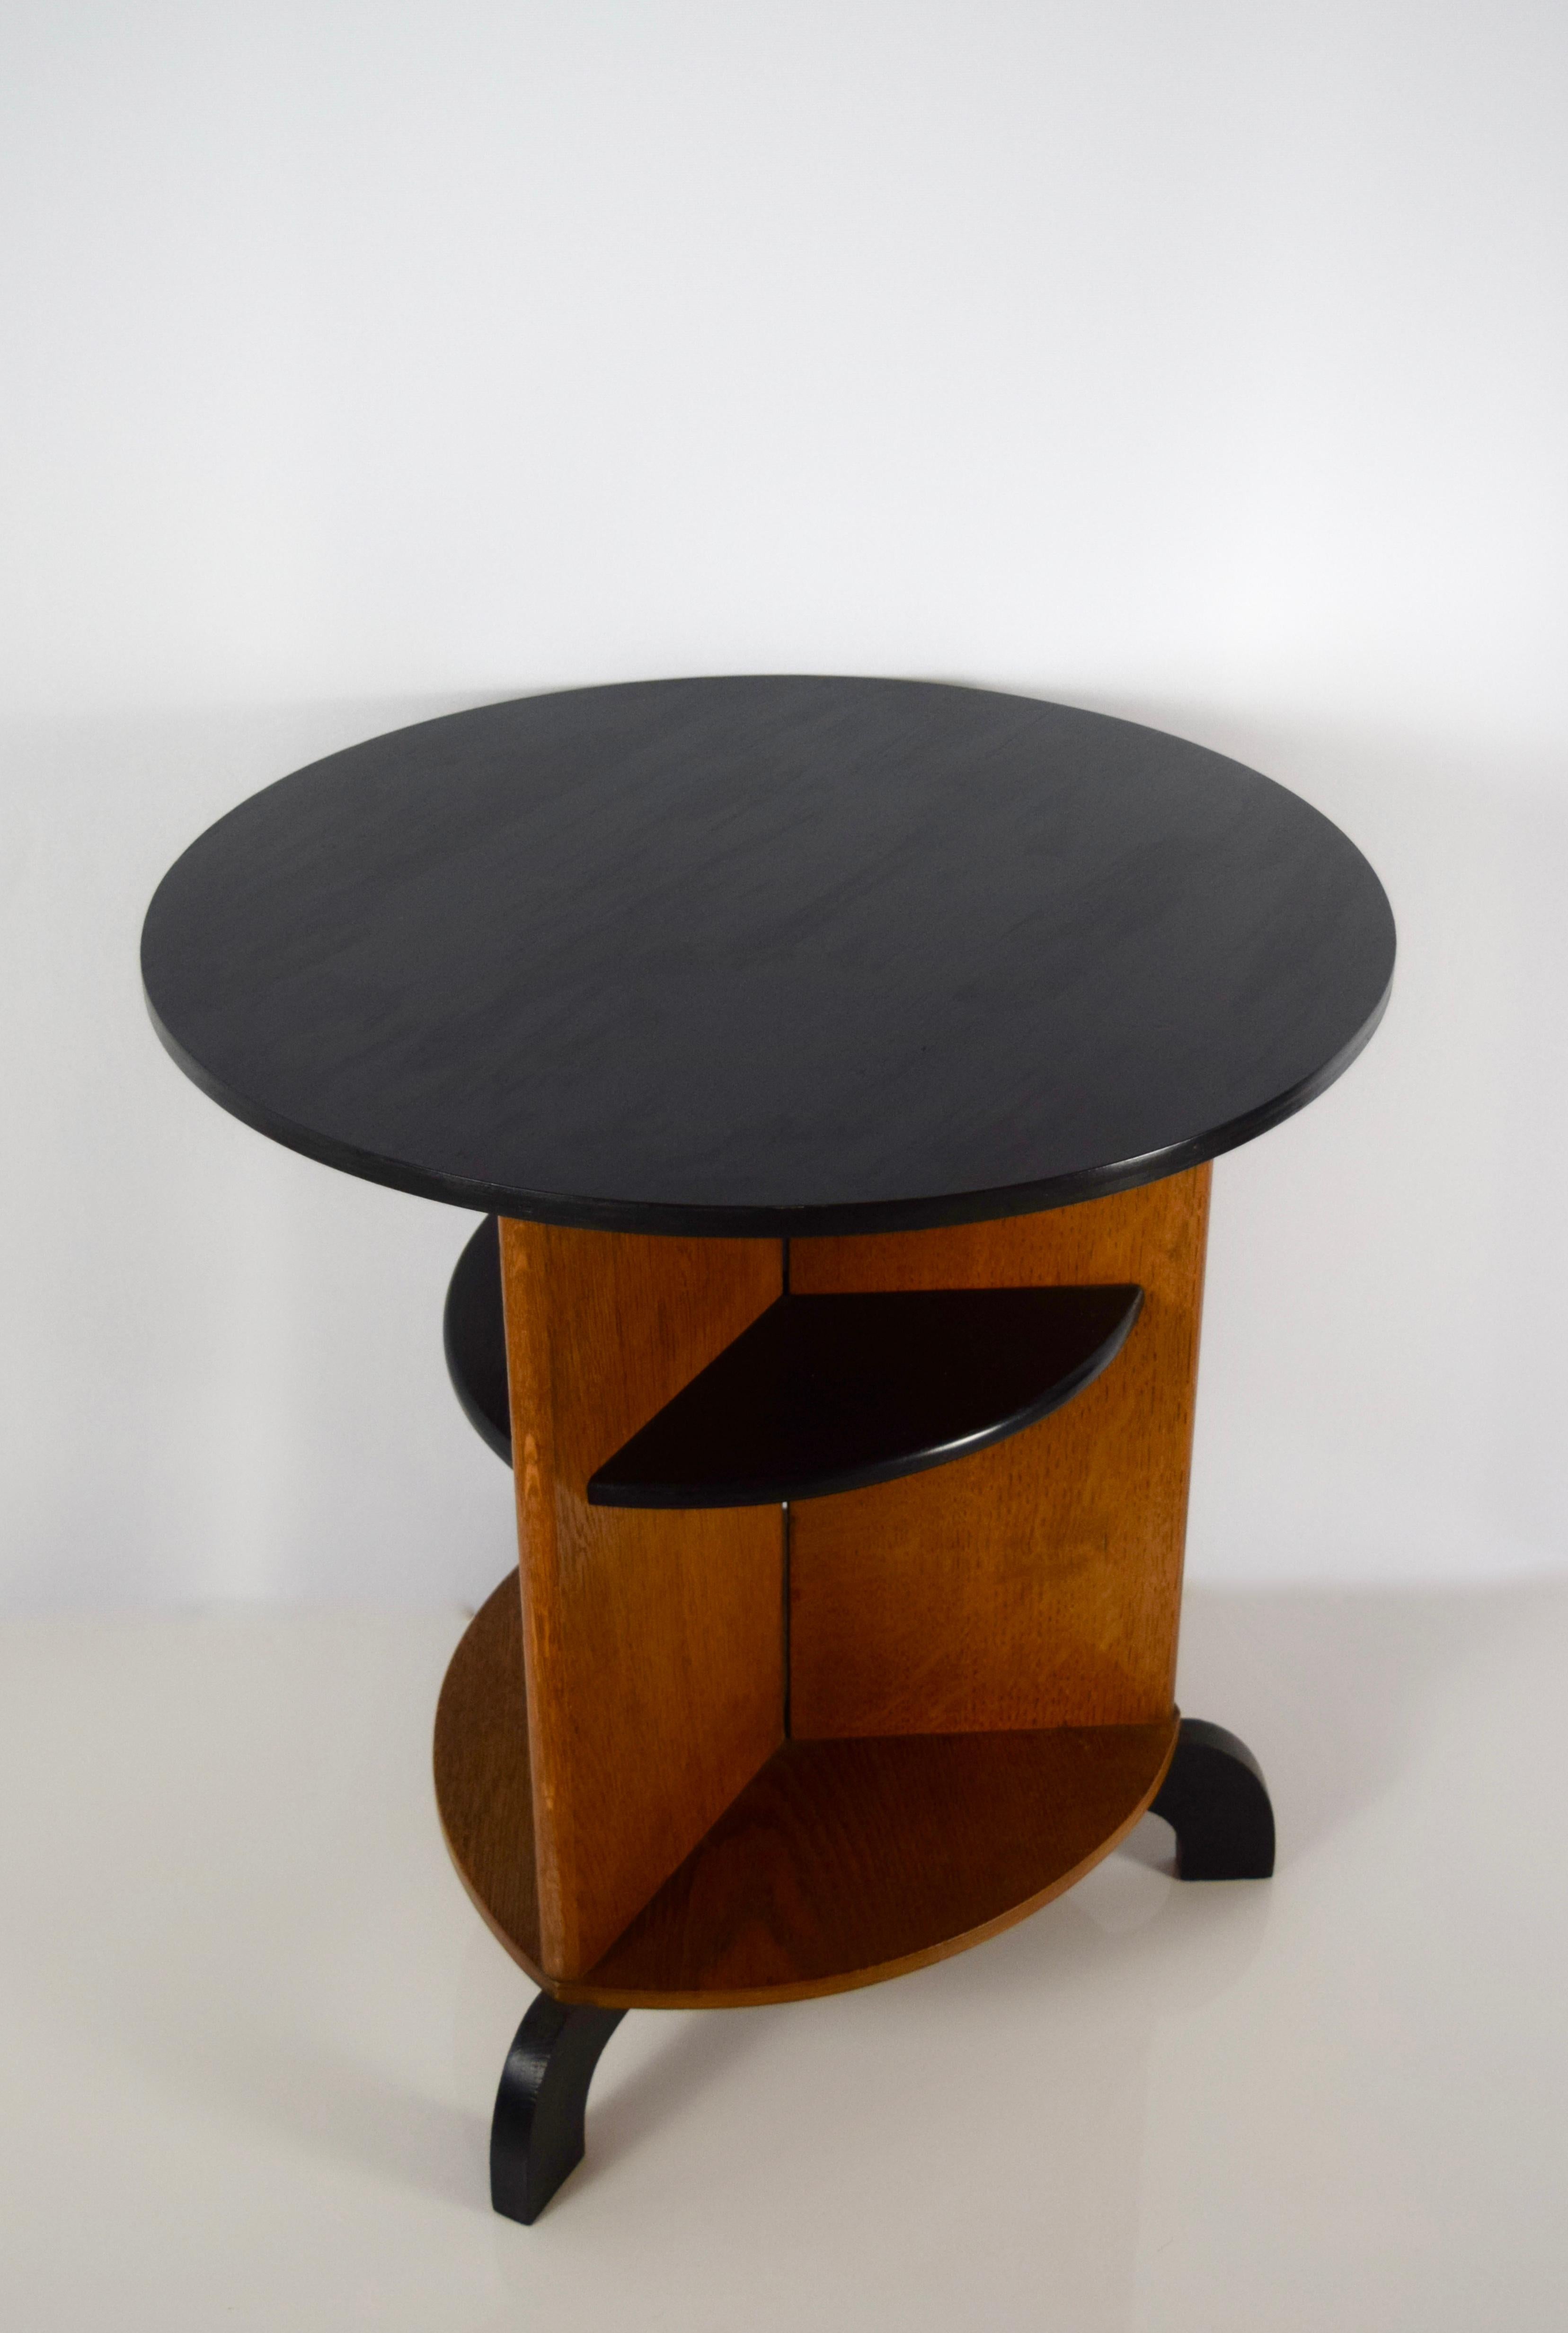 Lacquered Art Deco Coffee or Side Table 'The Hague School', the Netherlands, 1920s